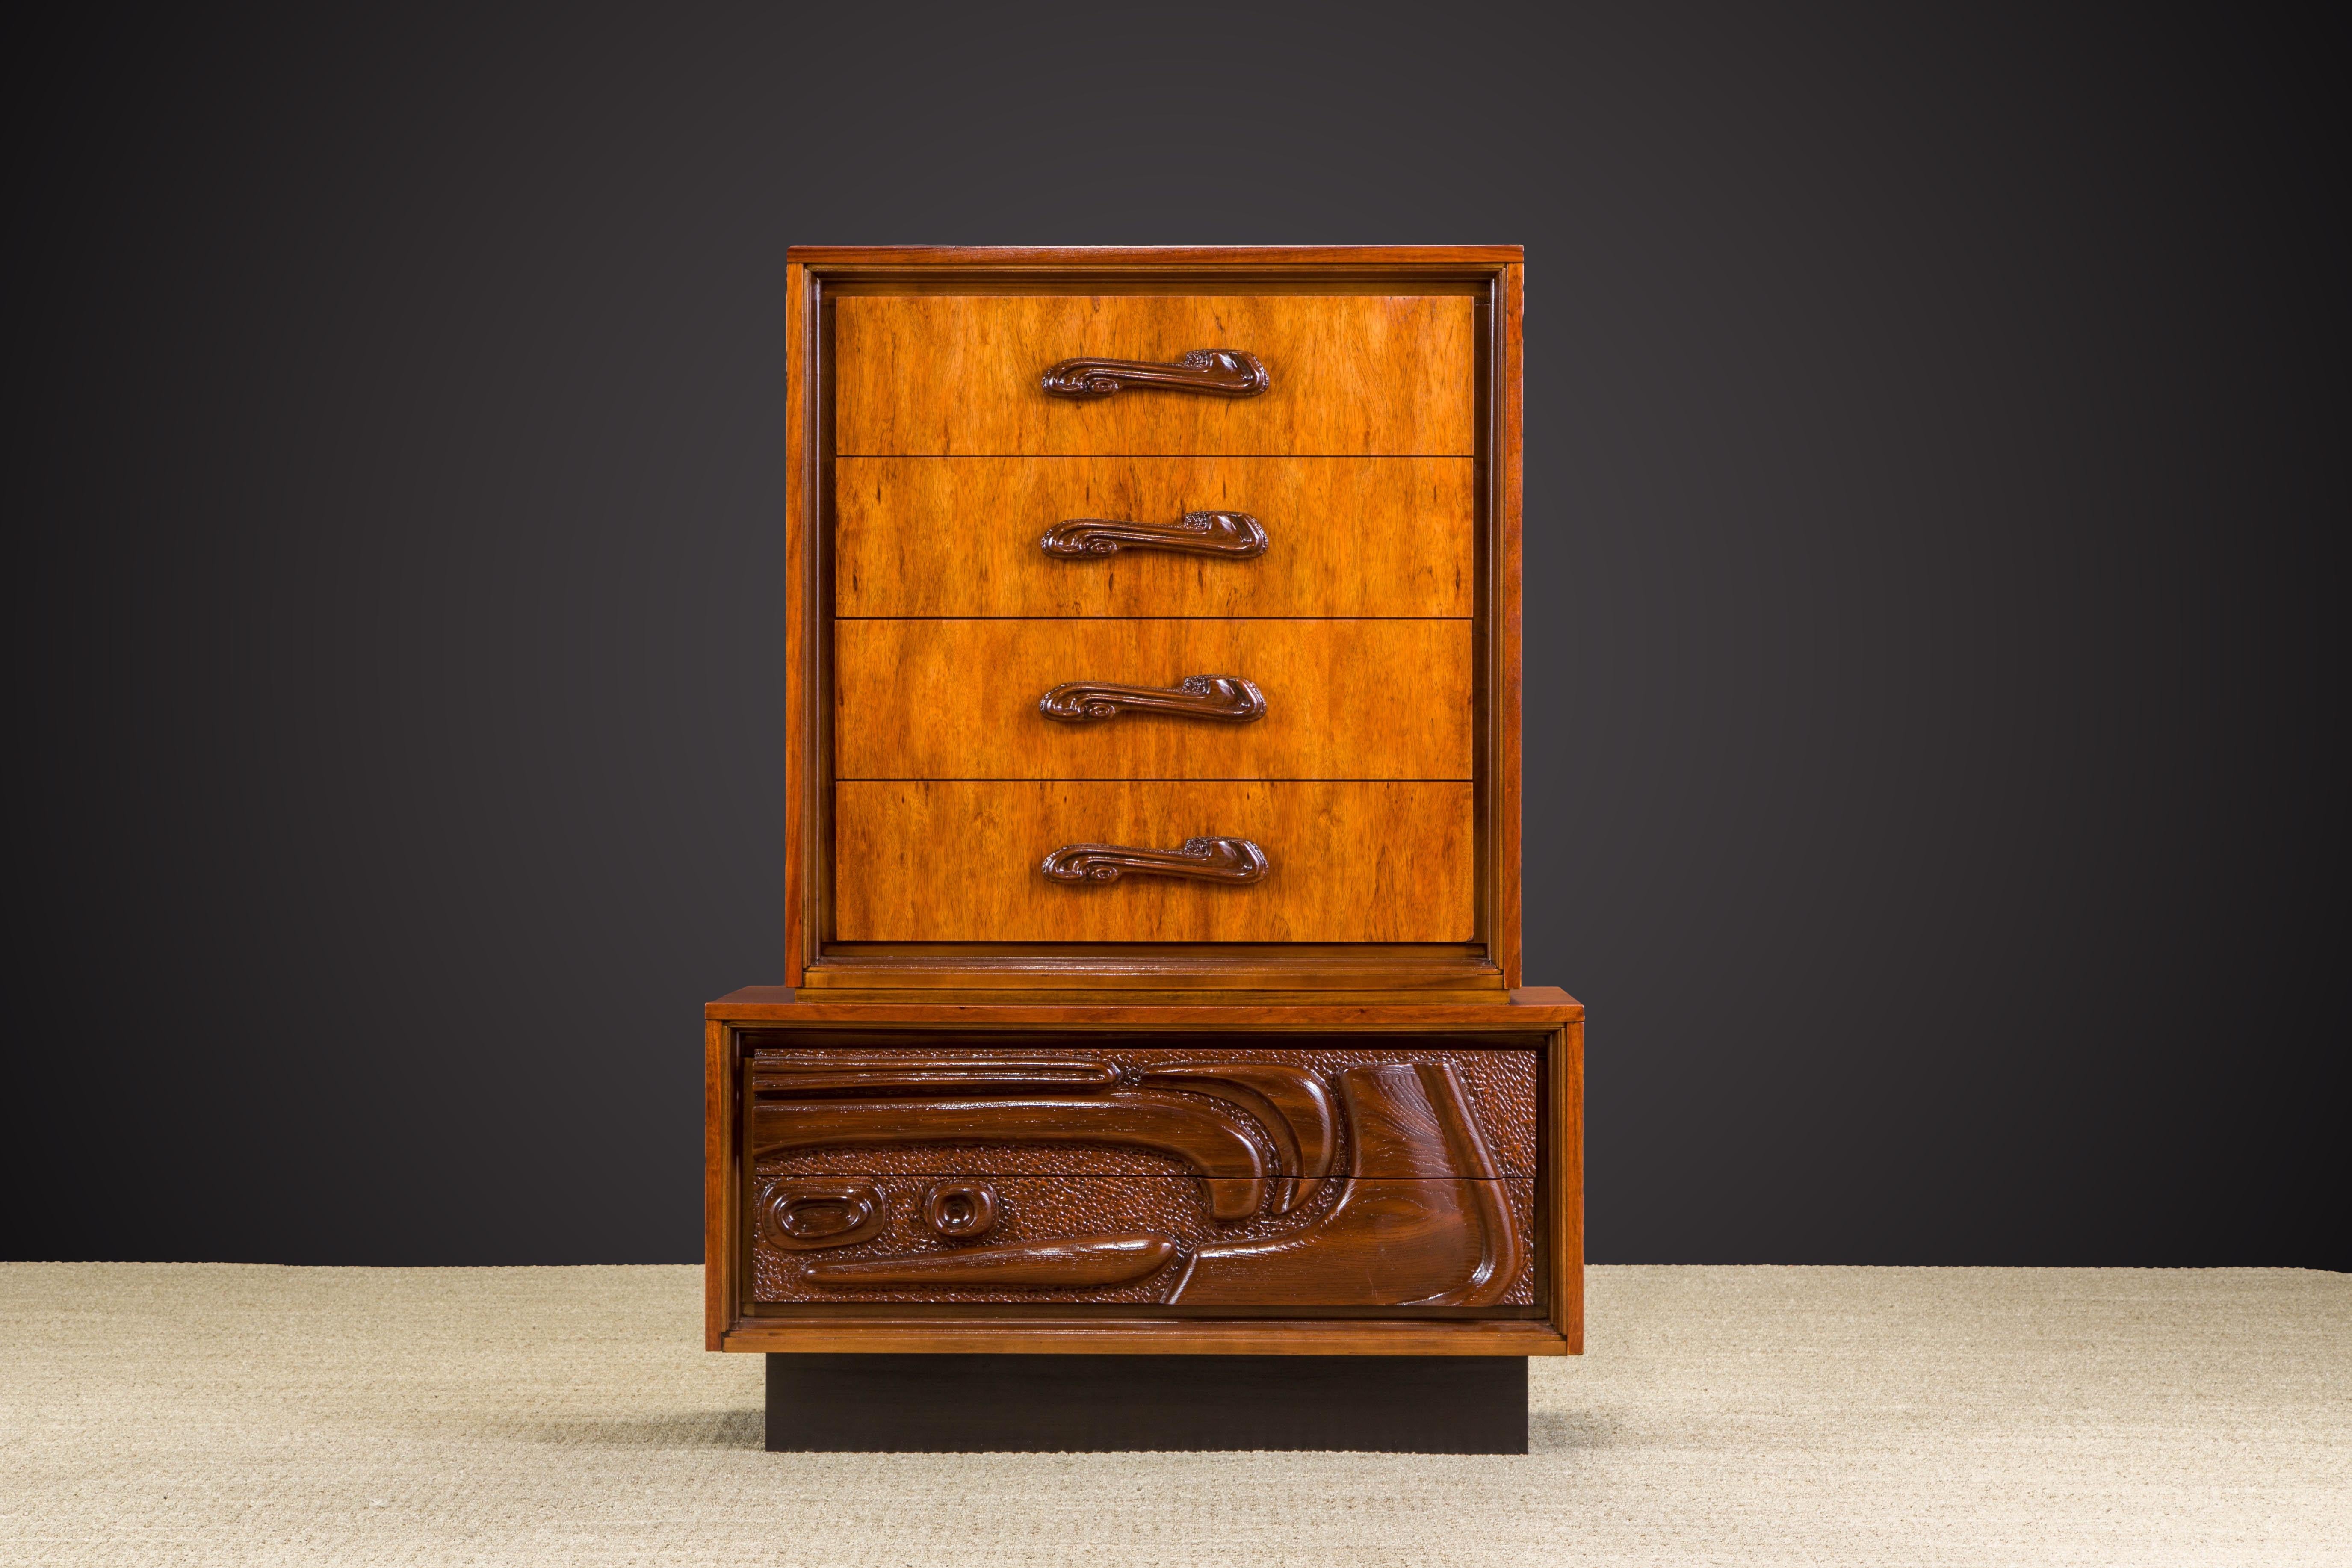 This fantastic lacquered sculpted walnut 'Oceanic' highboy dresser cabinet by Pulaski Furniture Corporation, circa 1969 which perfectly encapsulates the California surf mentality of the 1960s and 1970s, making this piece a highly sought after design